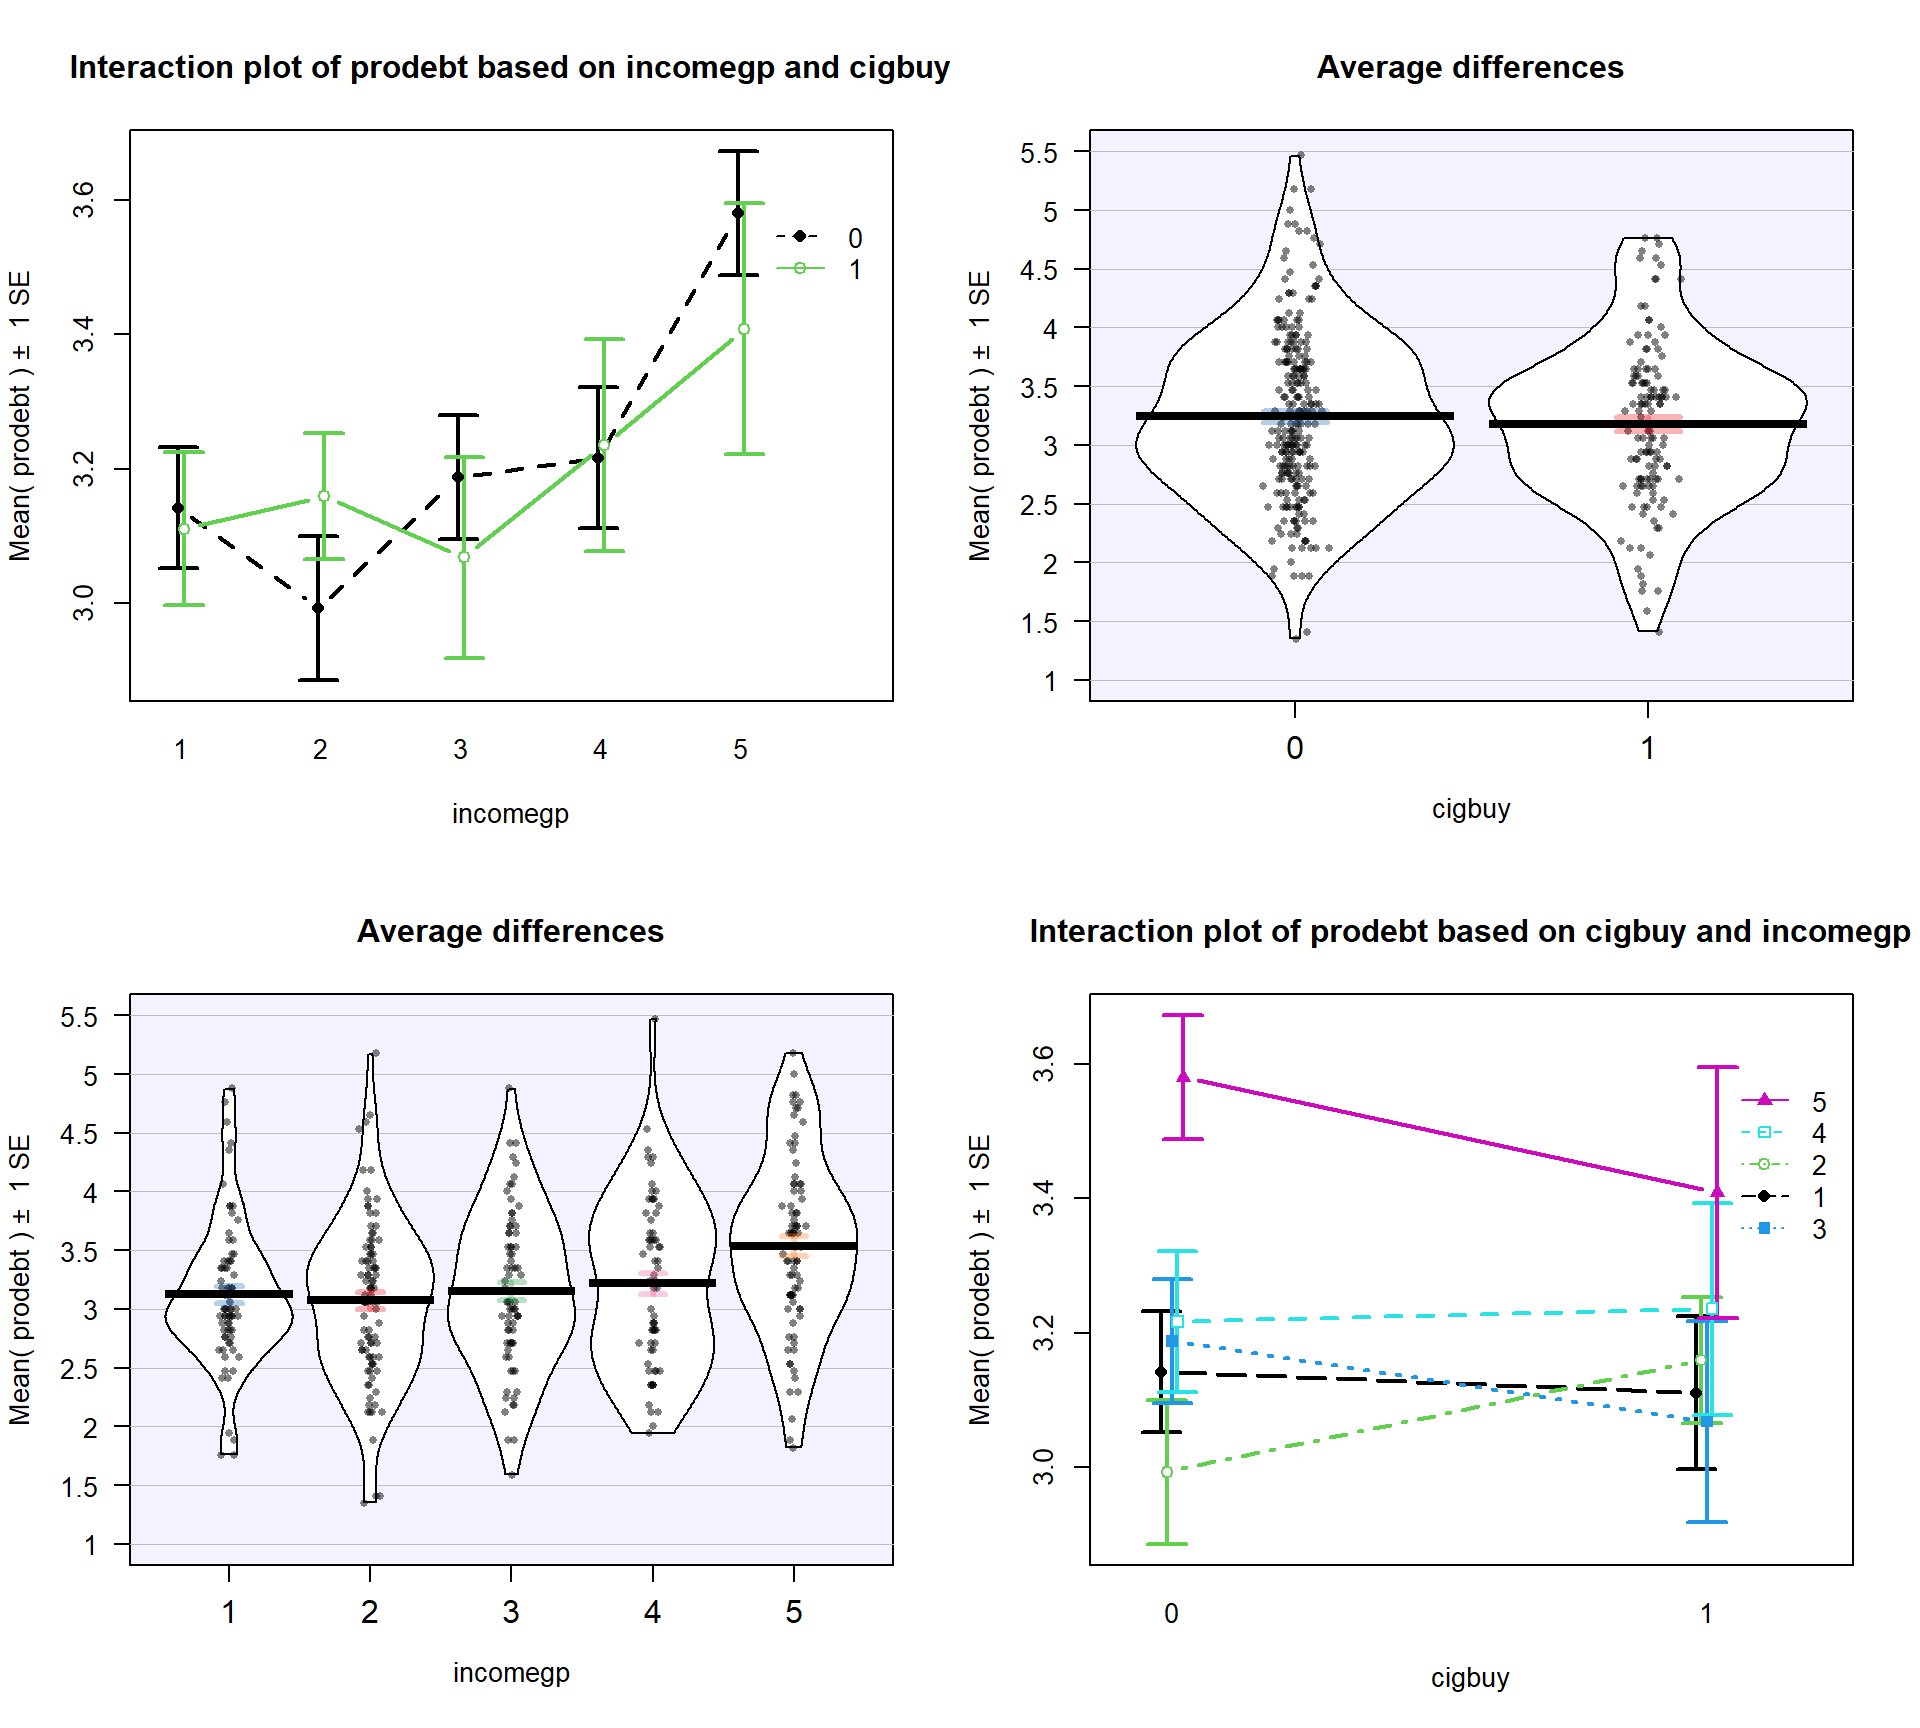 Interaction plot array of prodebt by income group (1 to 5) and whether they buy cigarettes (0 = no, 1 = yes).